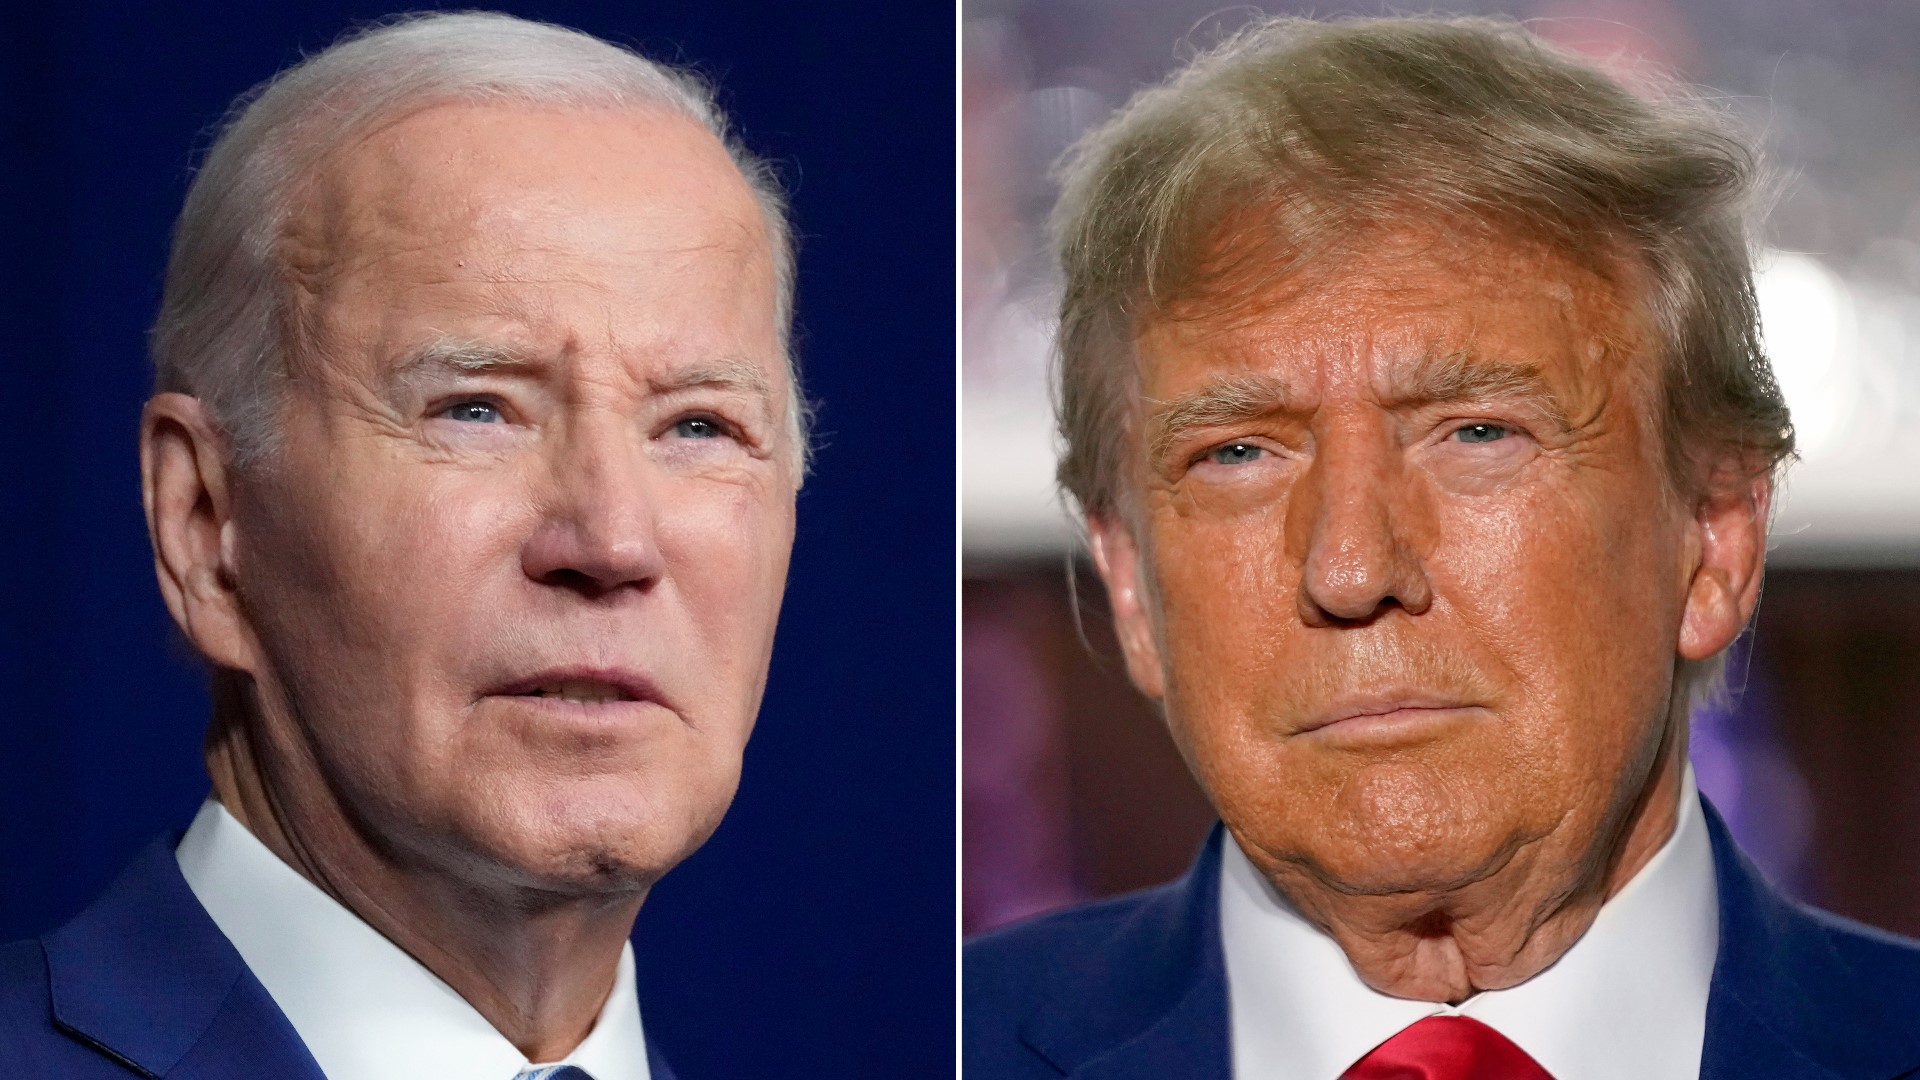 Heading into the November election recent polls show Joe Biden and Donald Trump have roughly equal support from voters.